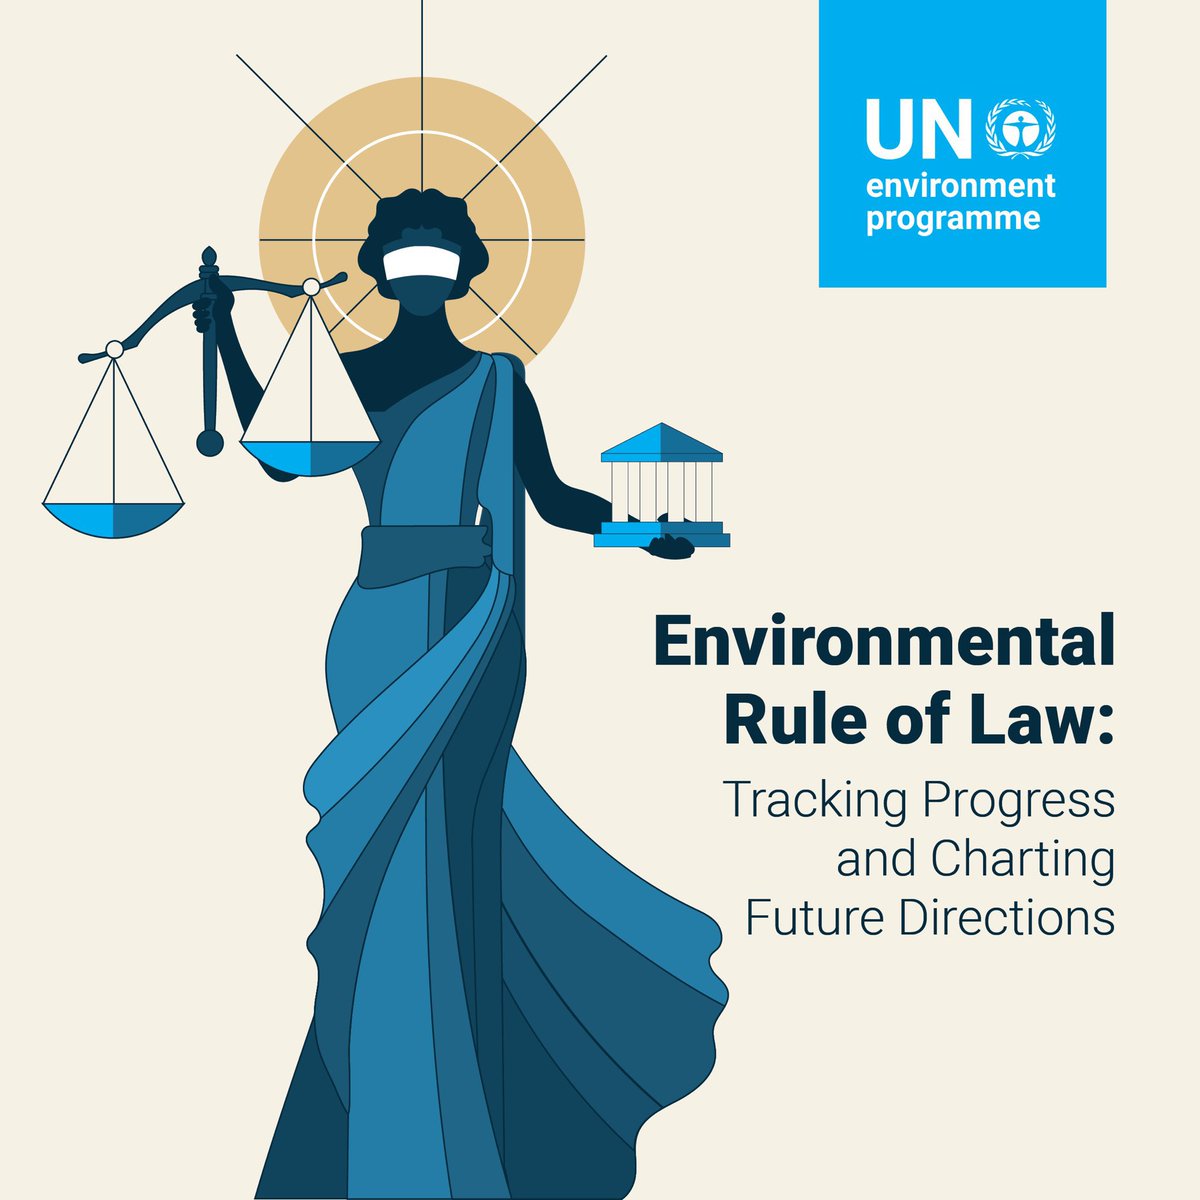 To ensure the urgent transformation we need to tackle our triple planetary crisis is delivered, environmental rule of law is becoming increasingly important. New @UNEP report looks at this evolving landscape and how governments can navigate these changes: unep.org/resources/publ…